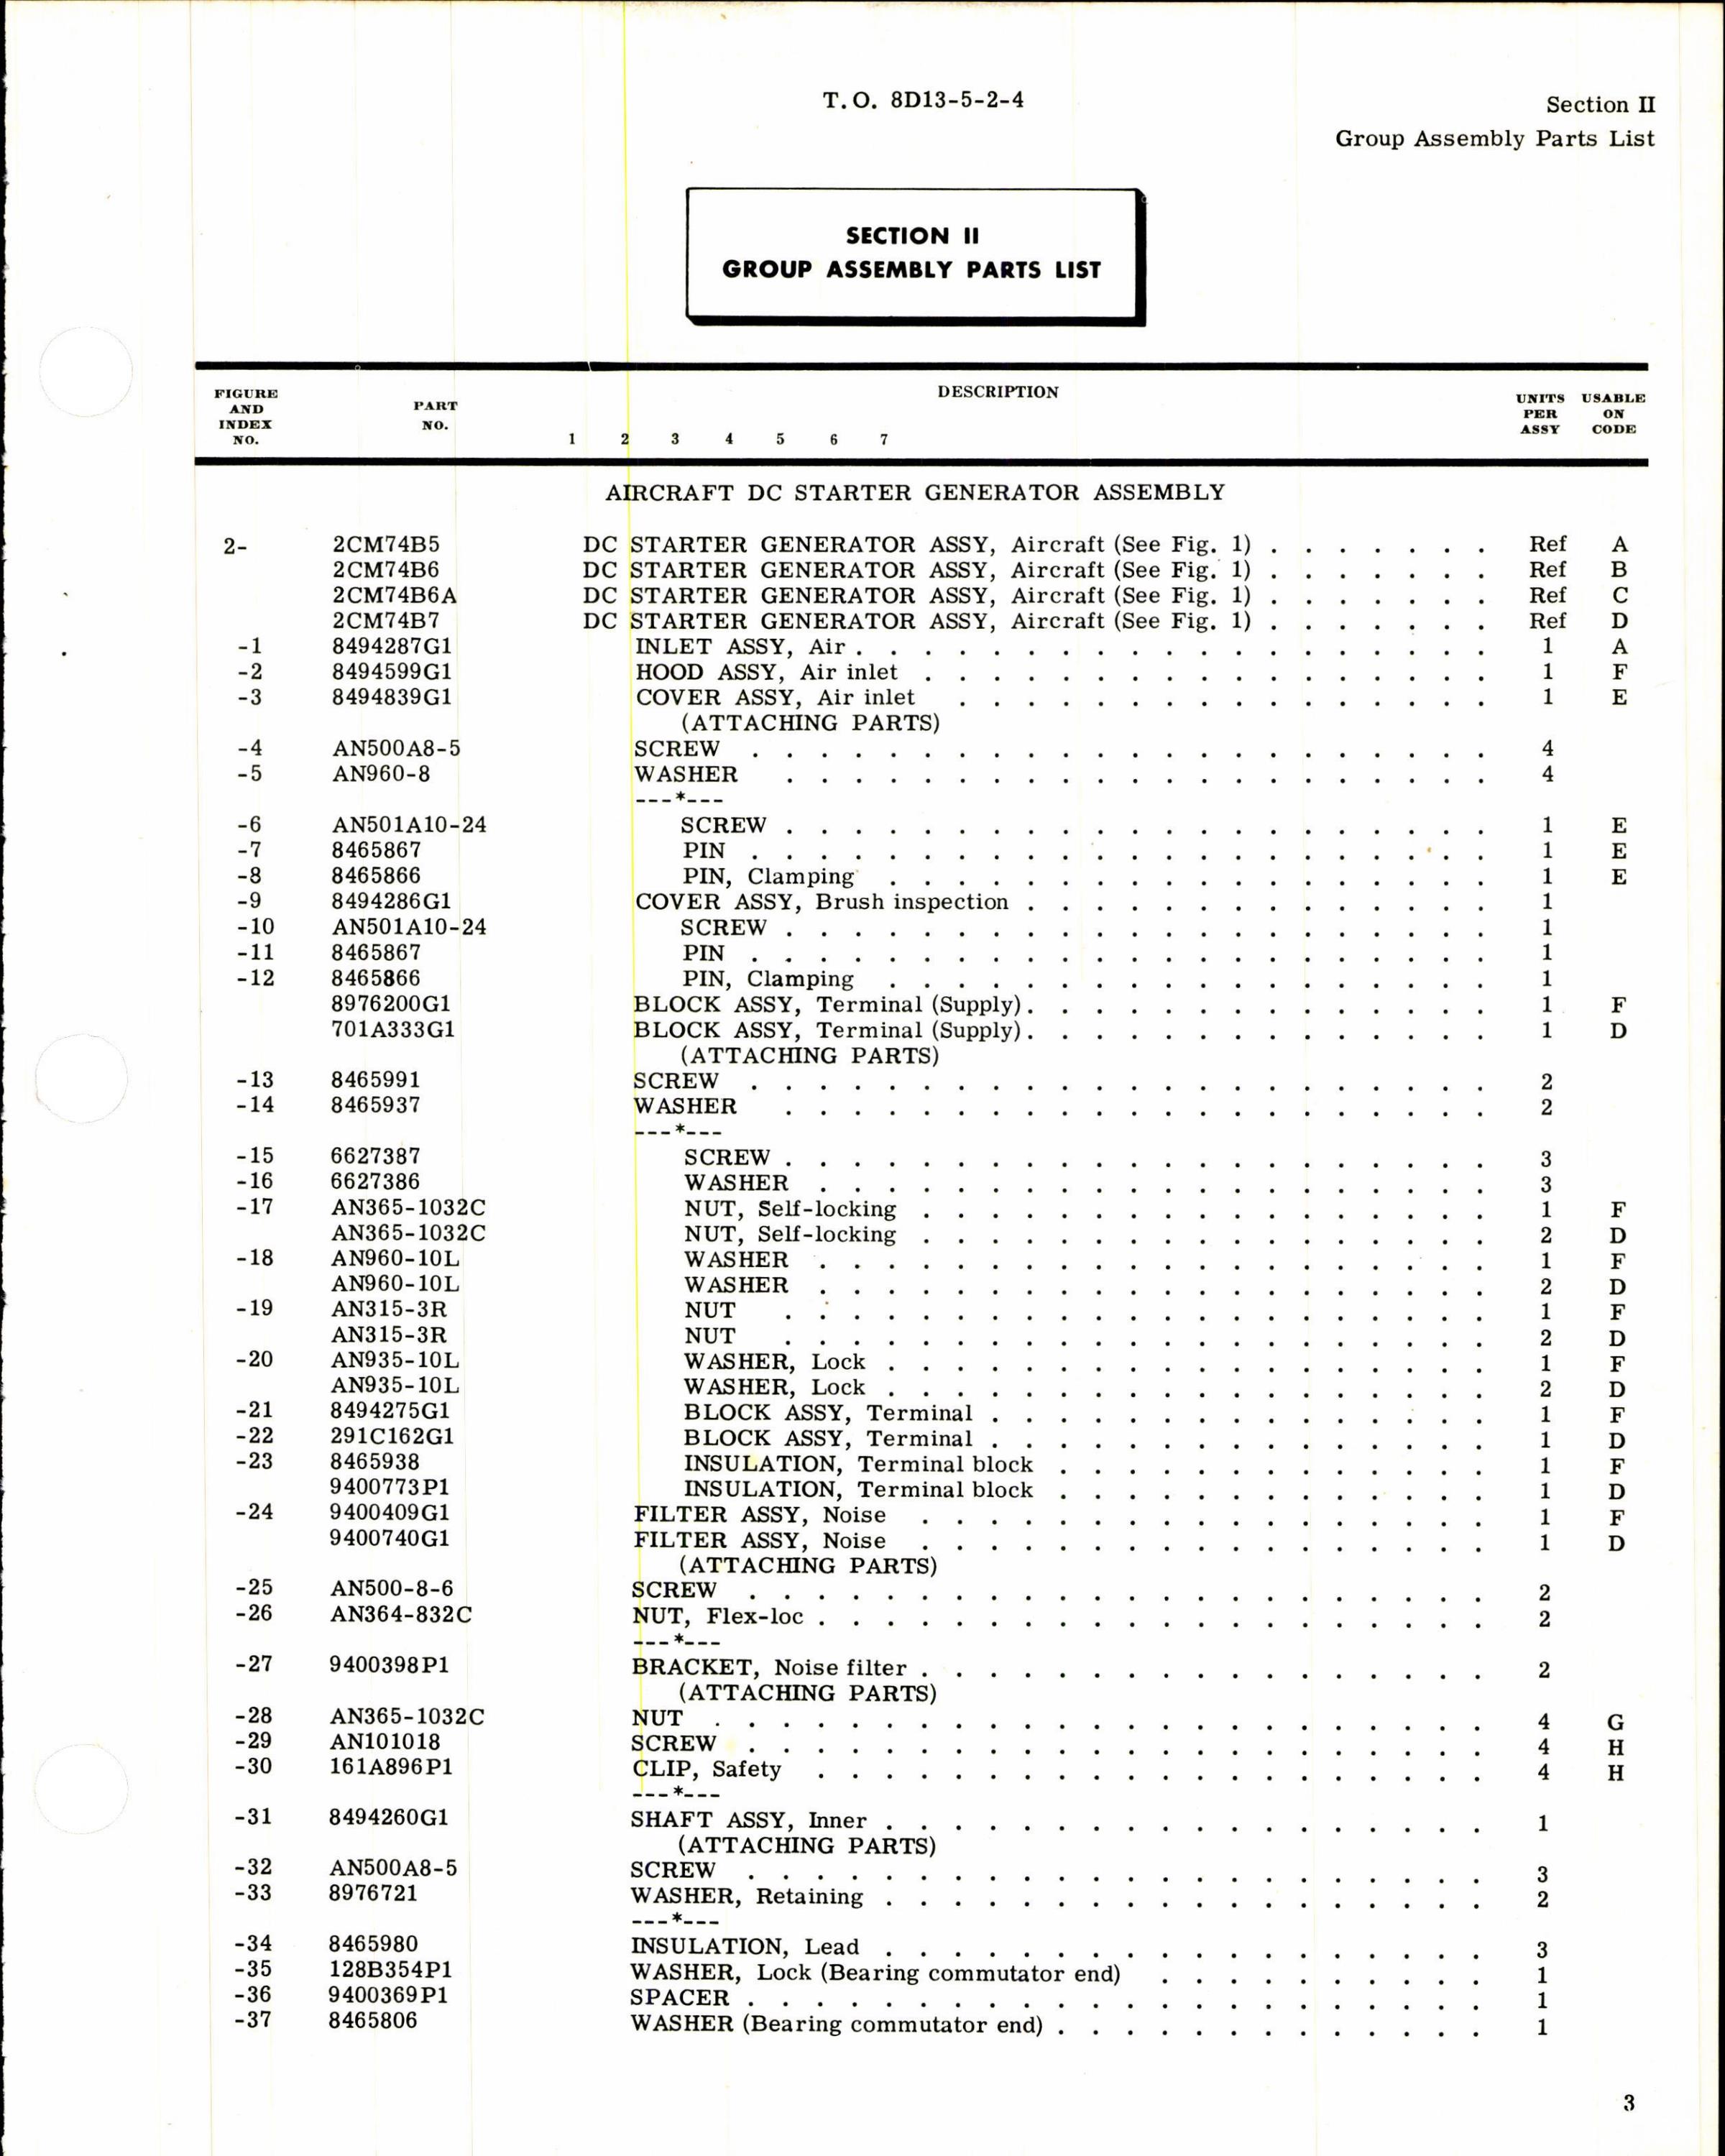 Sample page 3 from AirCorps Library document: Illustrated Parts Breakdown for Aircraft DC Starter Generator